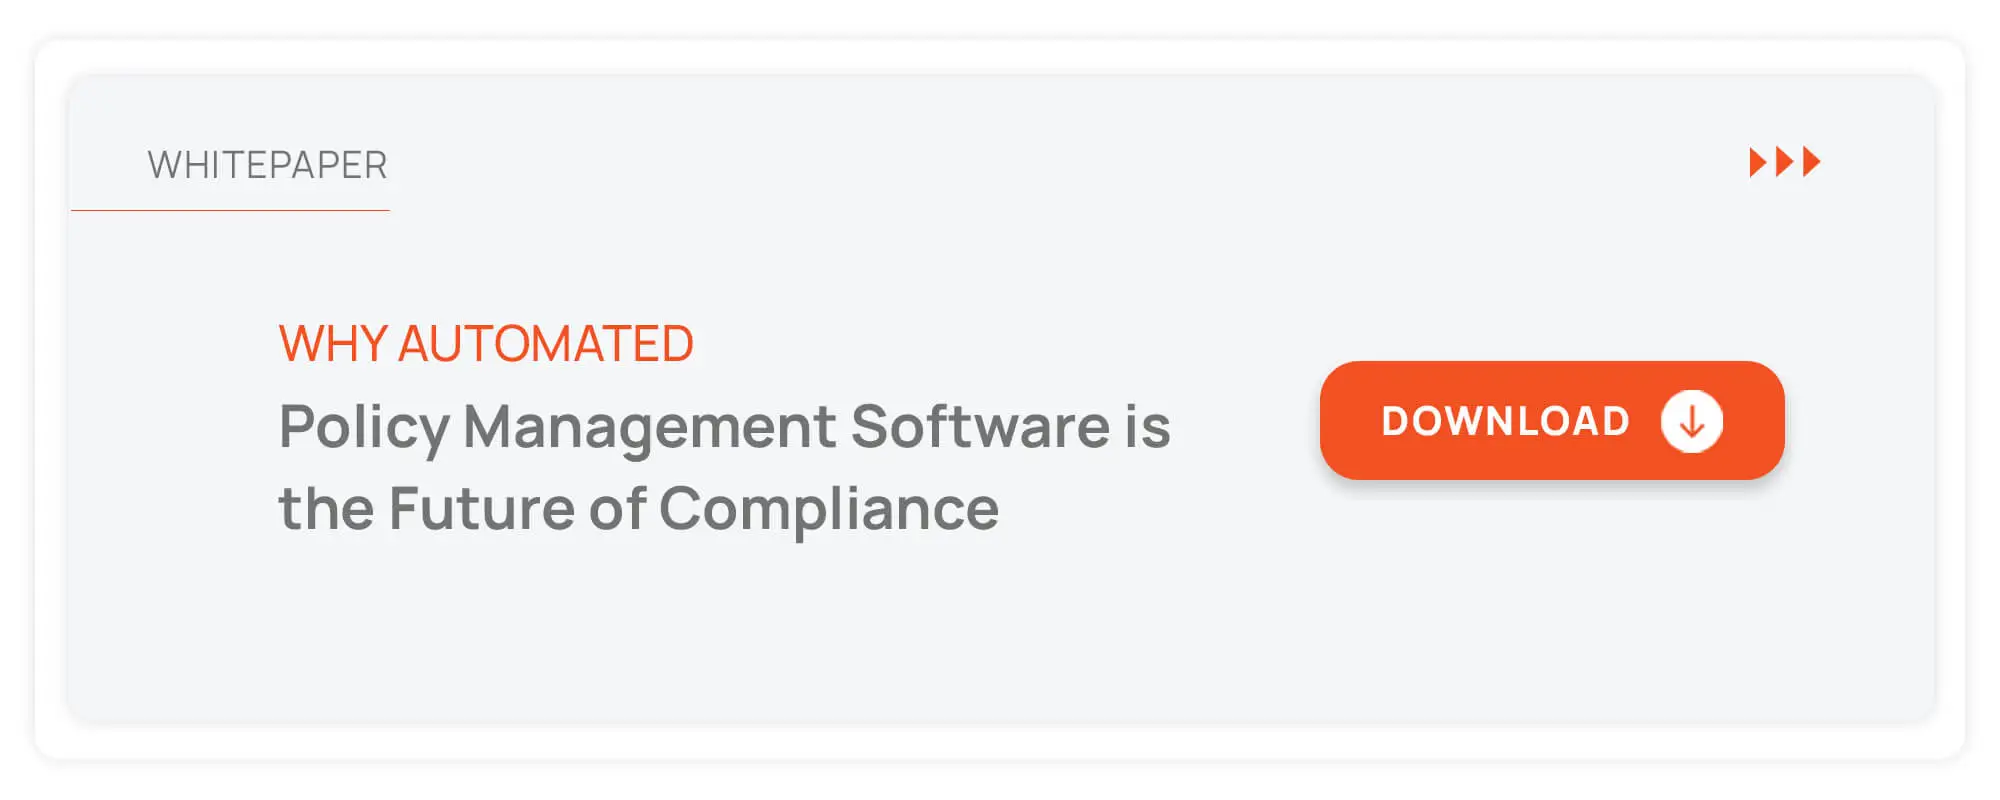 Why Automated Policy Management Software is the Future of Compliance